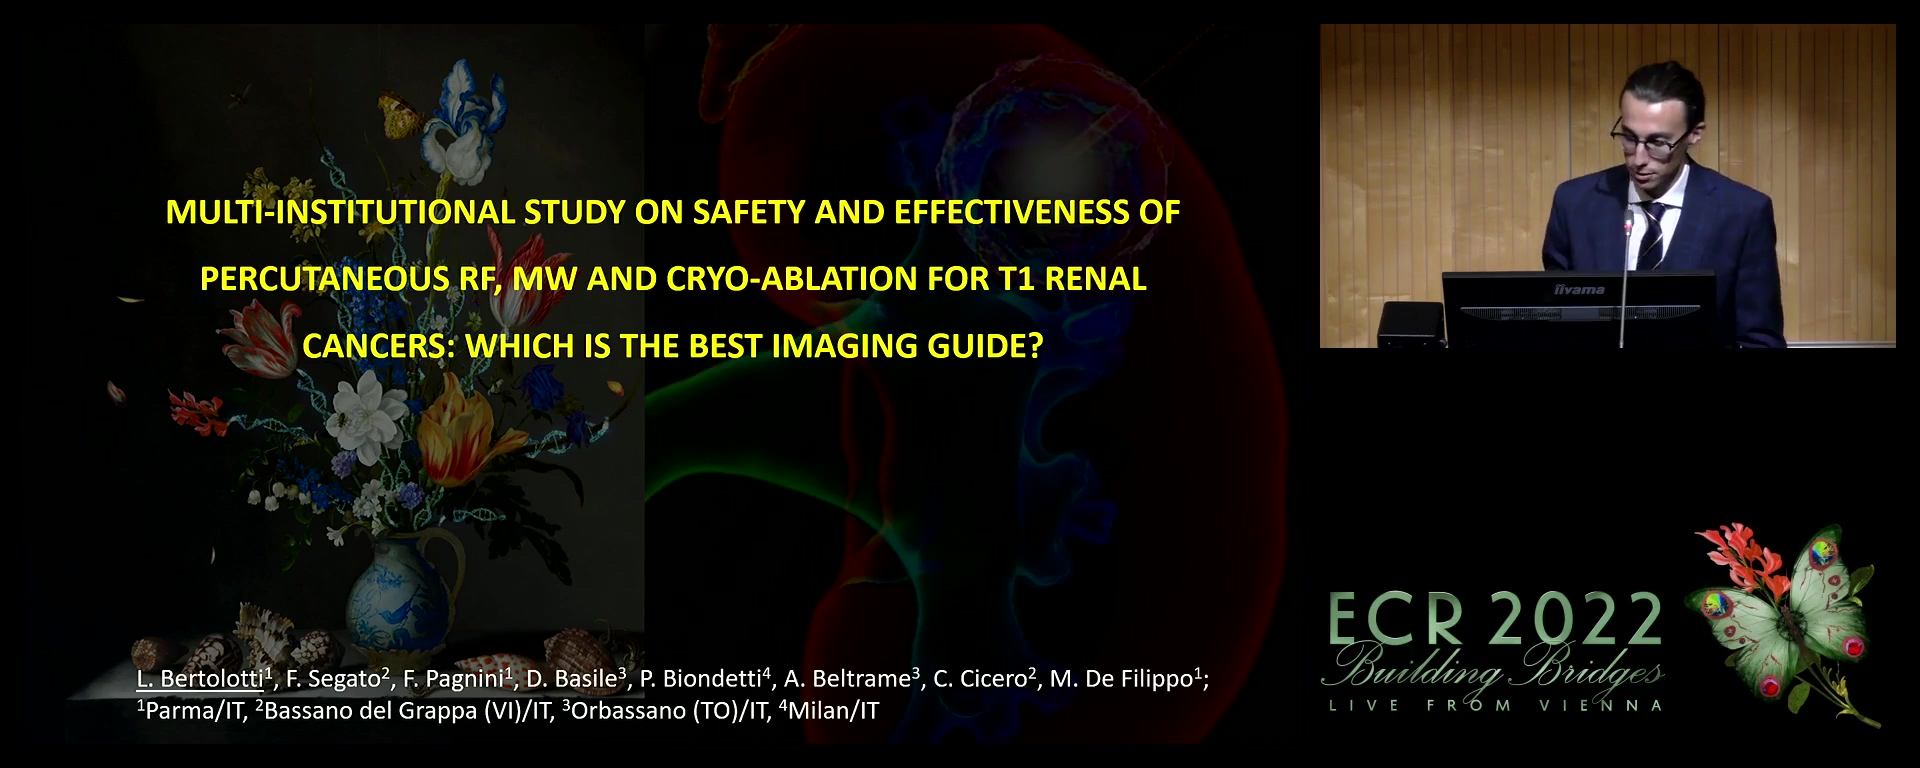 Multi-institutional study on safety and effectiveness of percutaneous RF, MW and cryo-ablation for T1 renal cancers: which is the best imaging guide? - Lorenzo Bertolotti, PARMA / IT